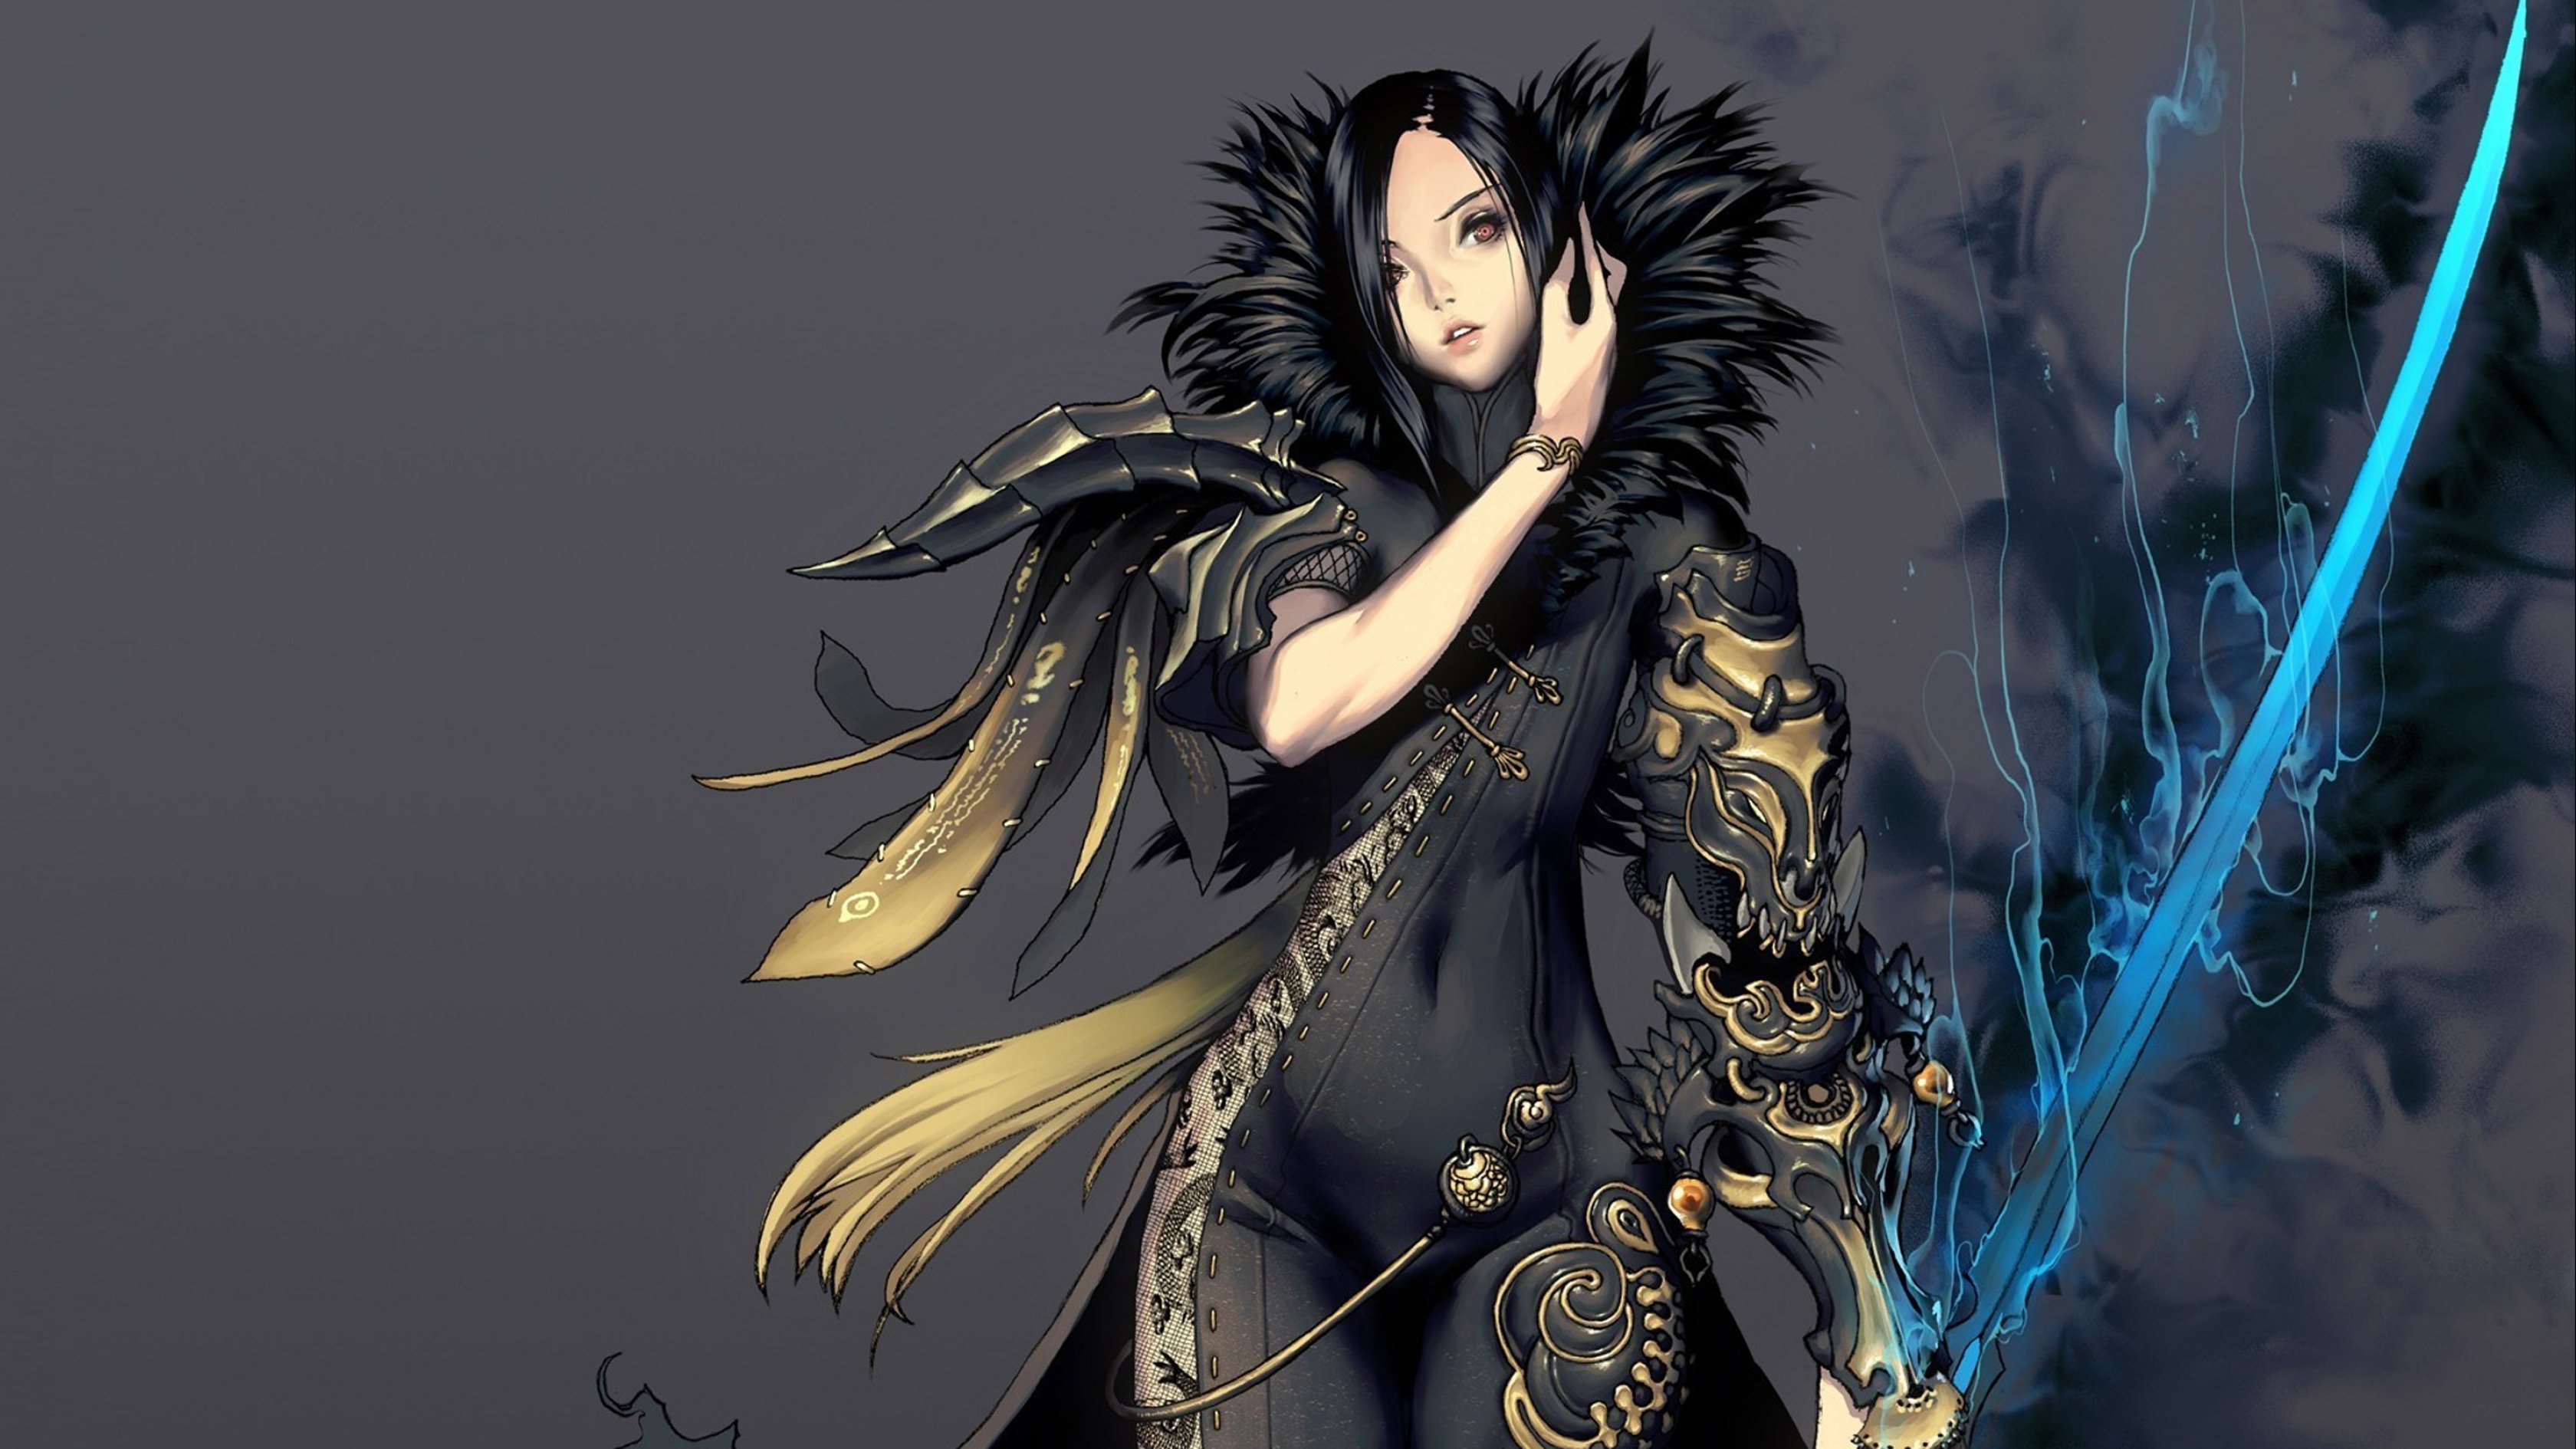 BLADE And SOUL asian martial arts action fighting 1blades online mmo rpg Beulleideu aen anime fantasy perfect wallpaperx1890